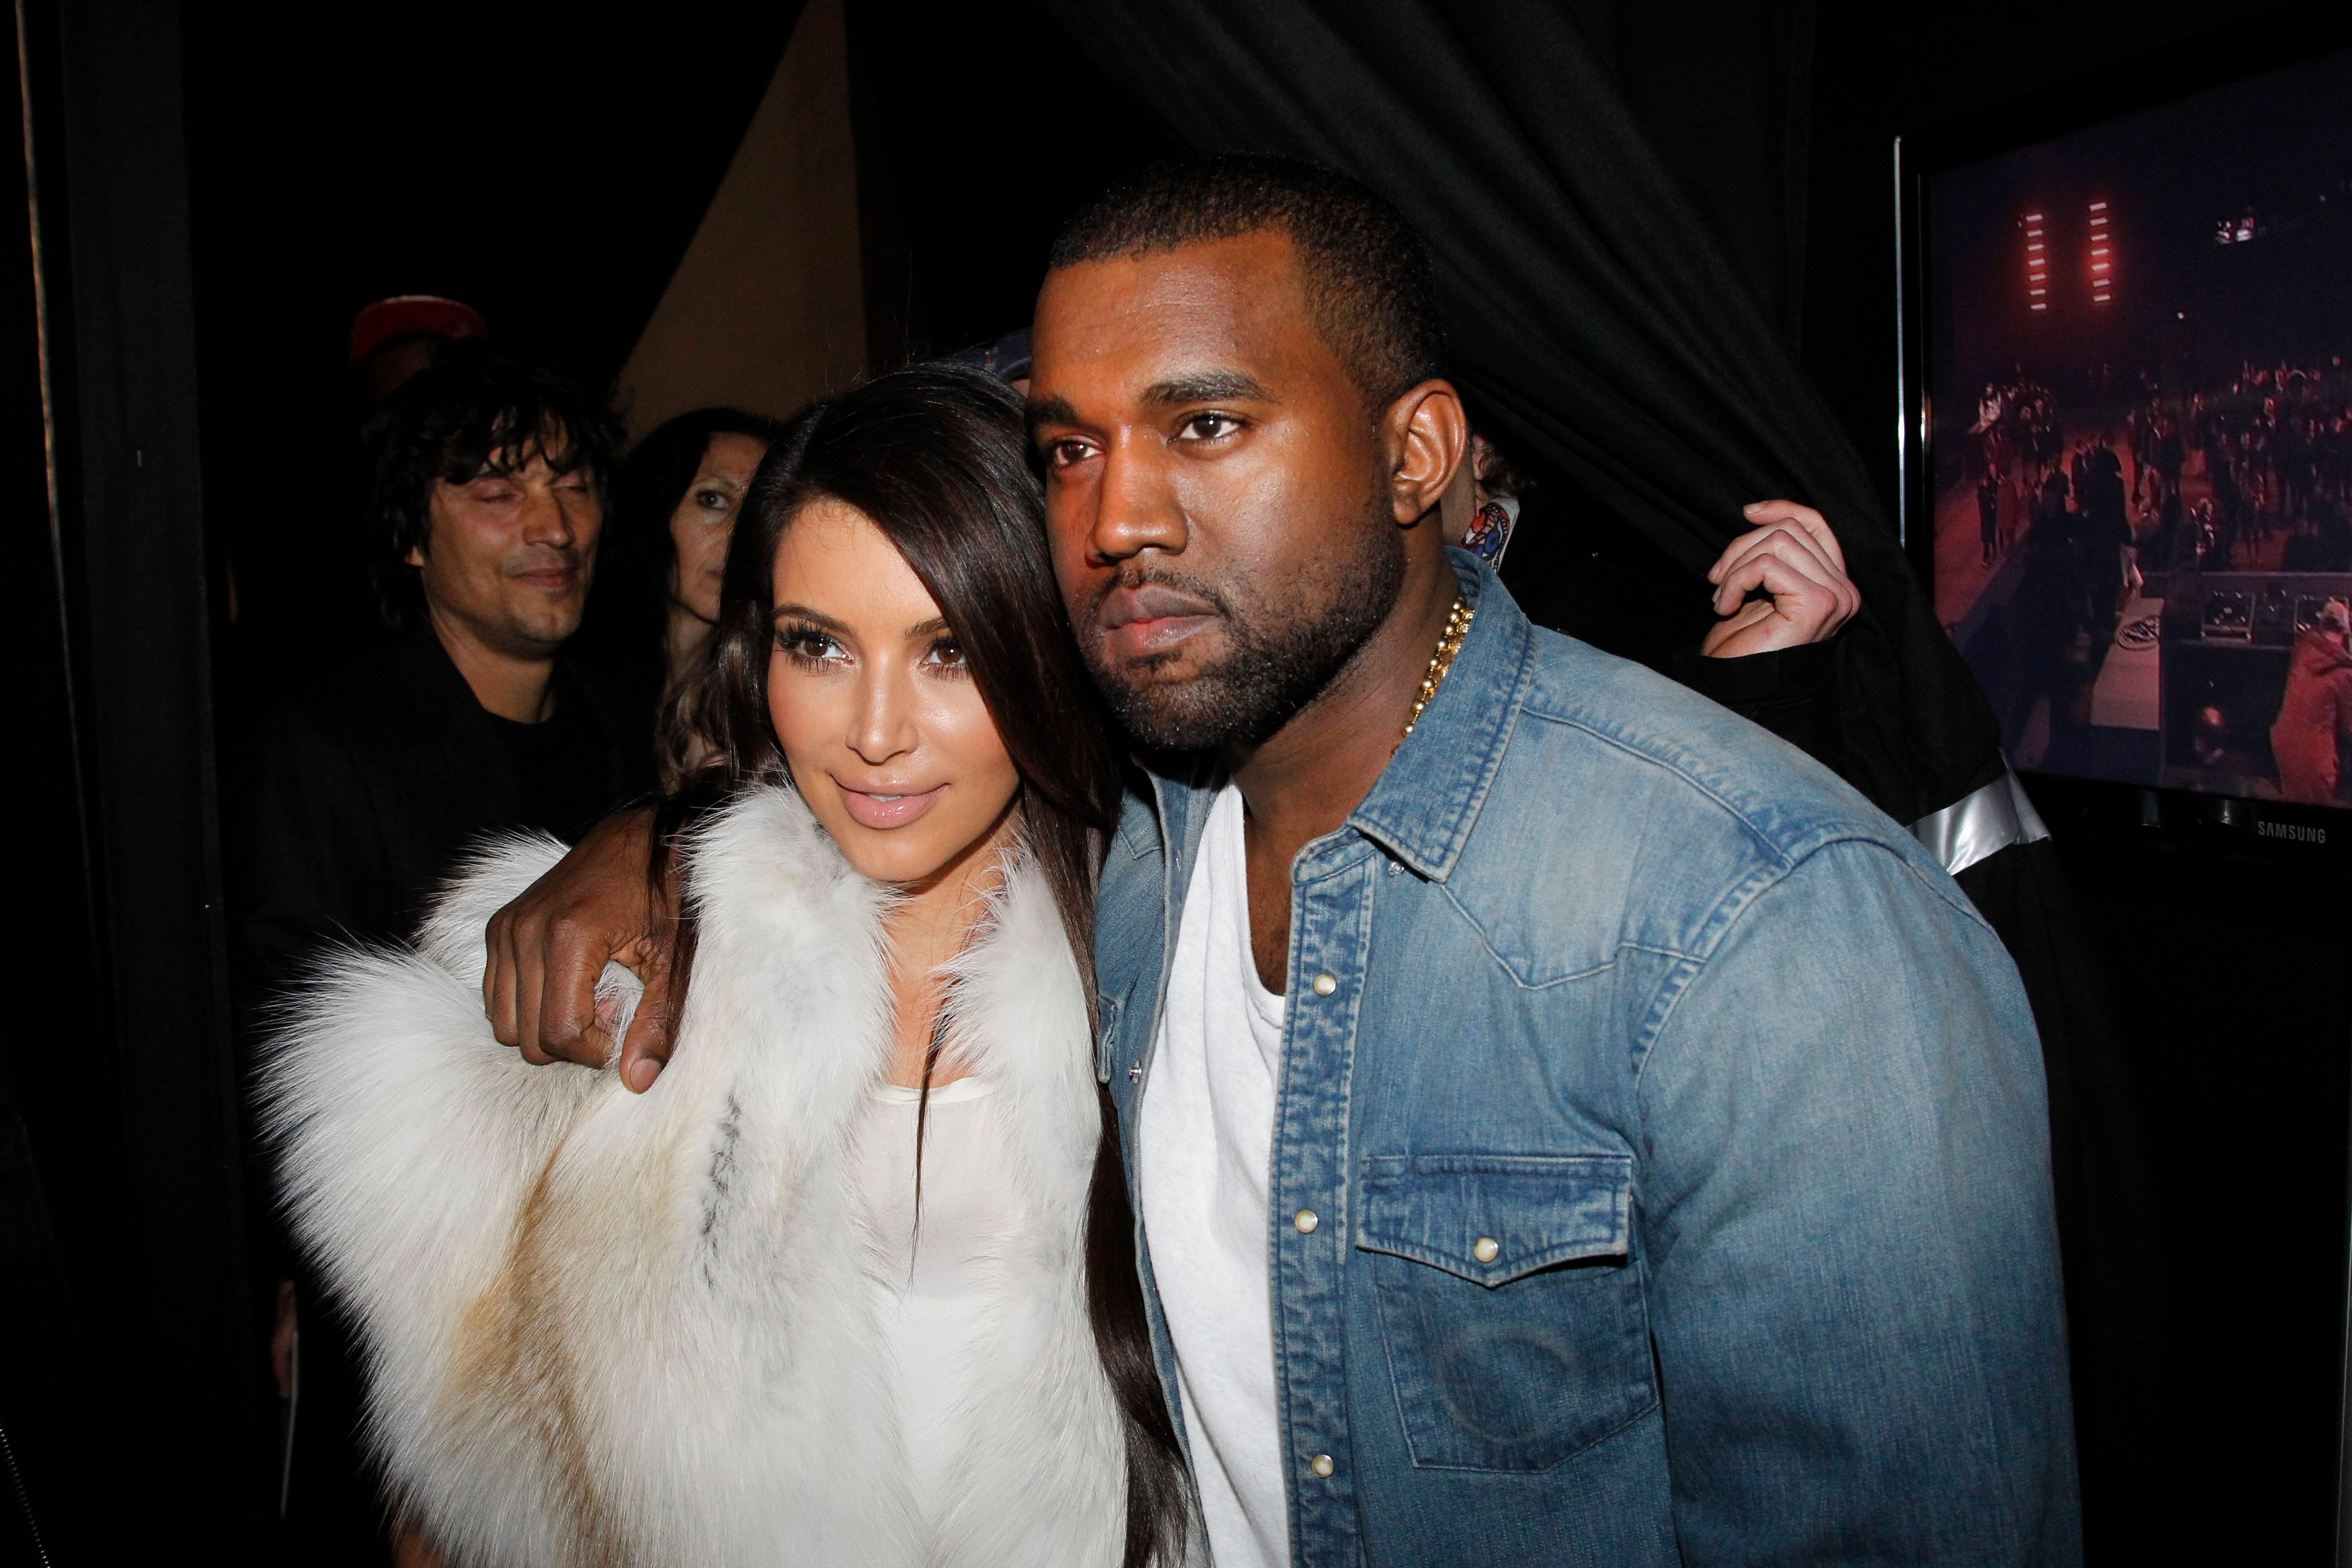 Kim Kardashian and Kanye West at the Kanye West Ready-To-Wear Fall/Winter show as part of Paris Fashion Week on March 6, 2012, in Paris, France | Photo: Getty Images